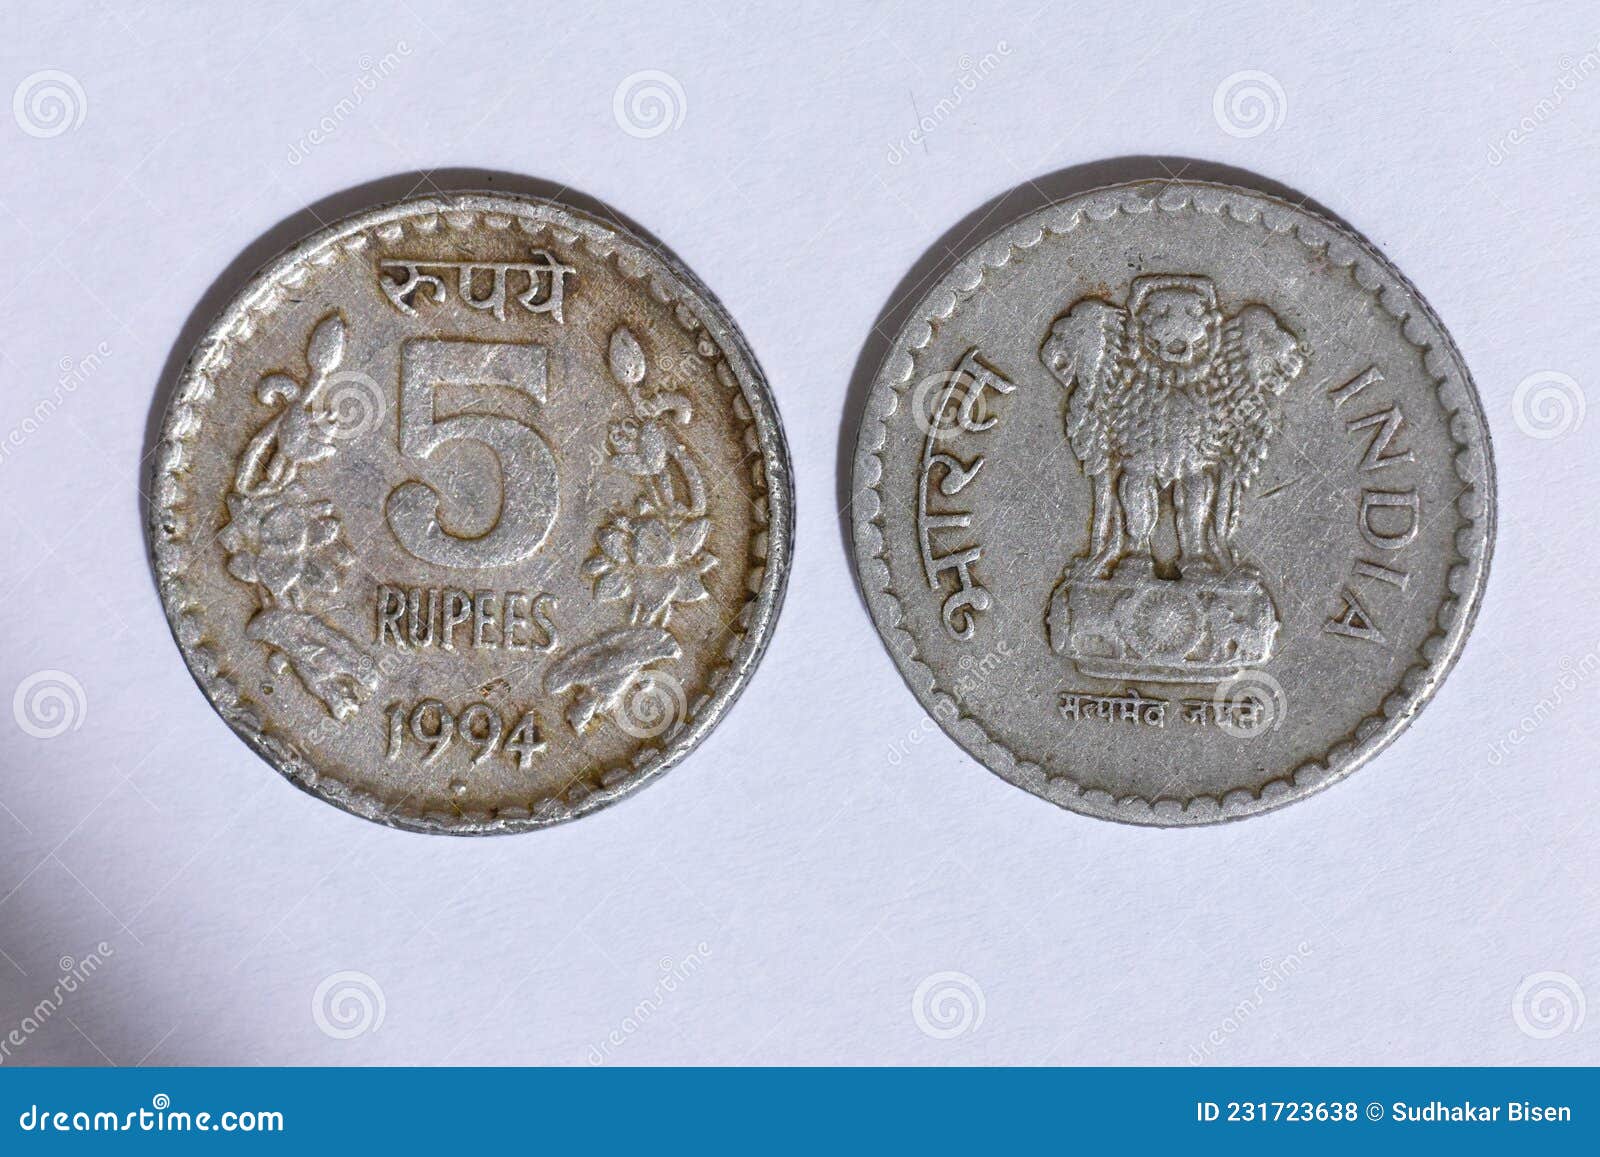 Indian Five Rupees Coin on the White Background Stock Photo - Image of ...